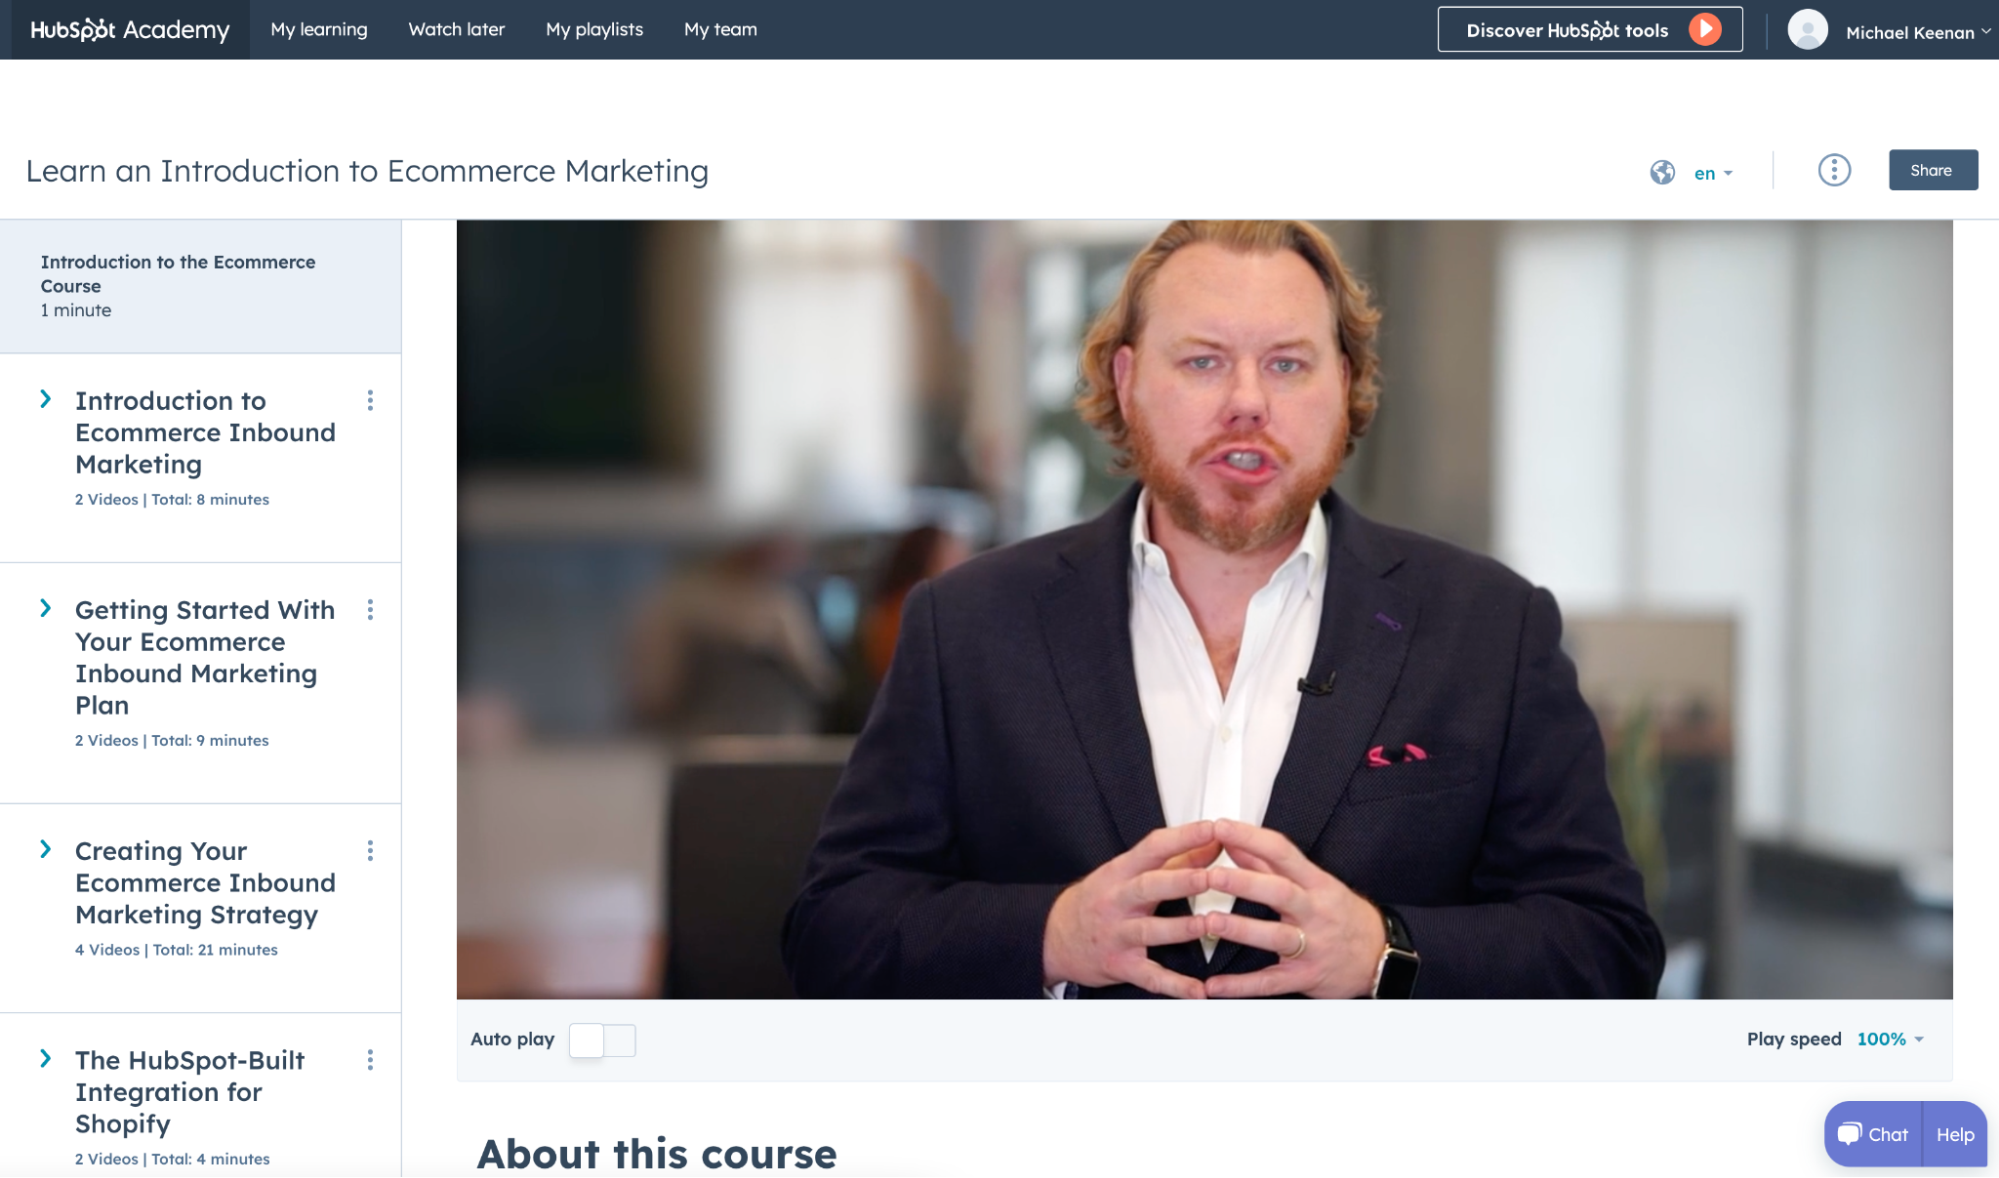 Image of Ethan Giffin teaching Hubspot’s ecommerce marketing training course